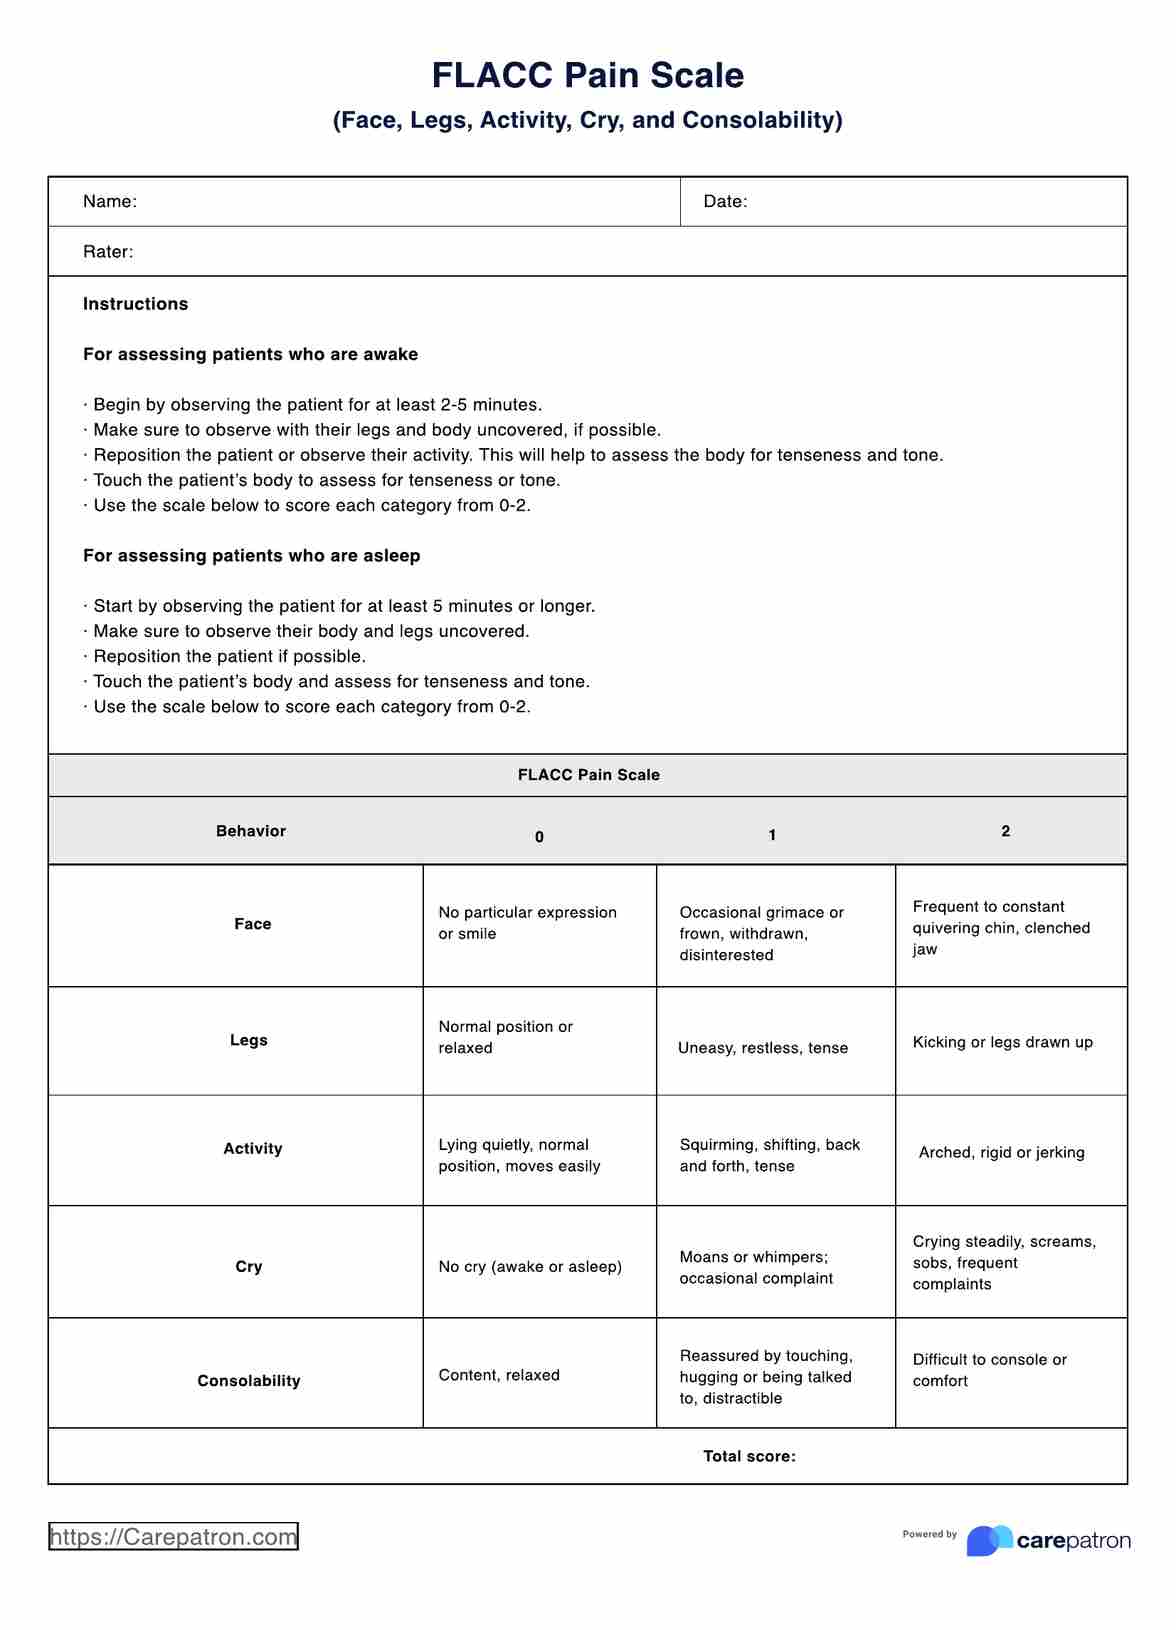 FLACC Pain Scale PDF Example